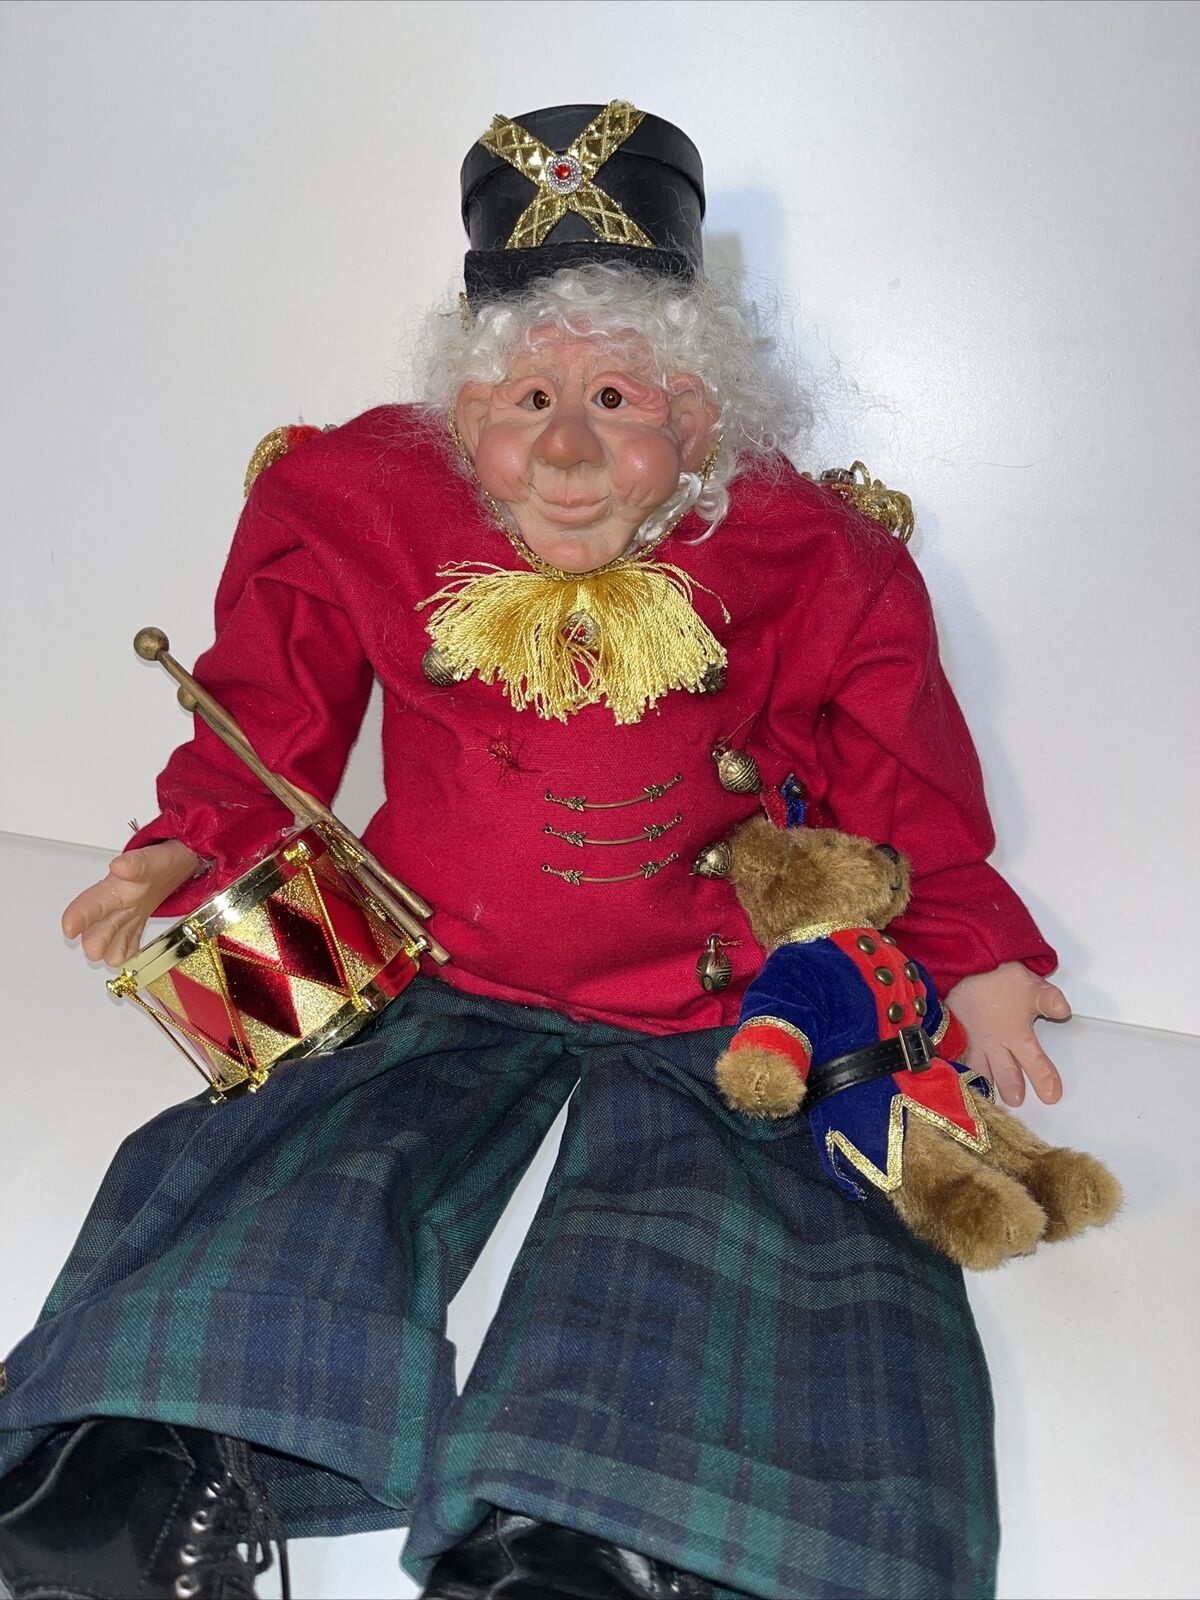 OOAK Artist Handcrafted Sculptured Polymer Christmas Doll Toy Soldier 23”